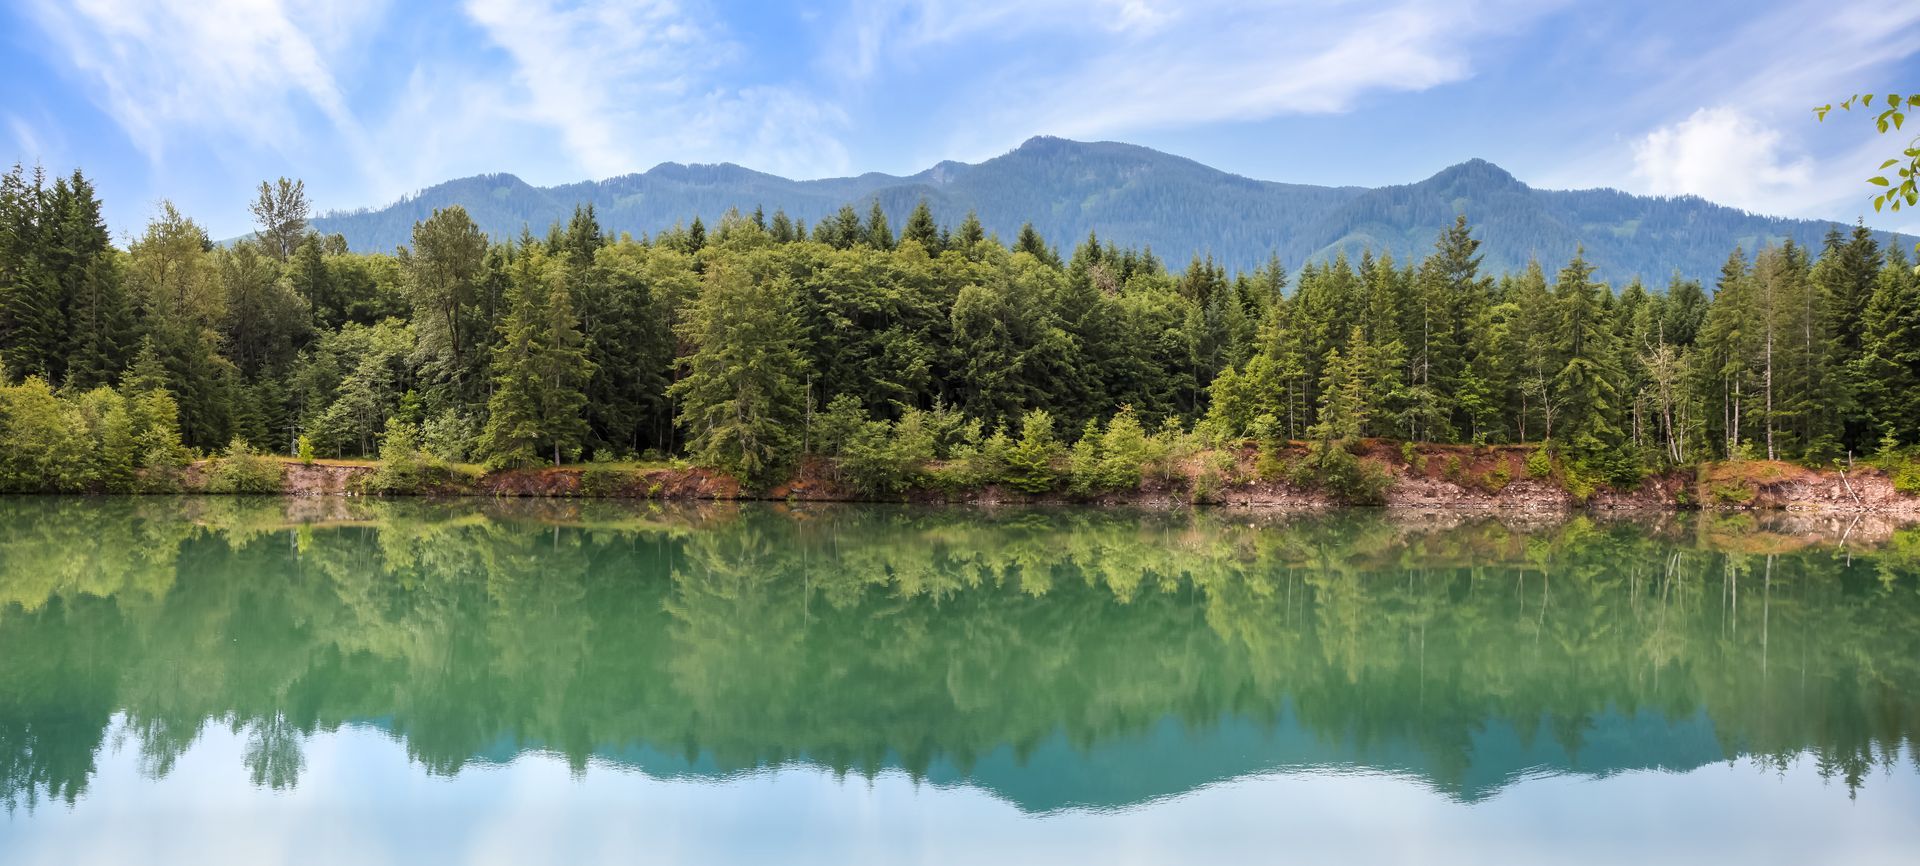 Photo of forest and lake in Washington State